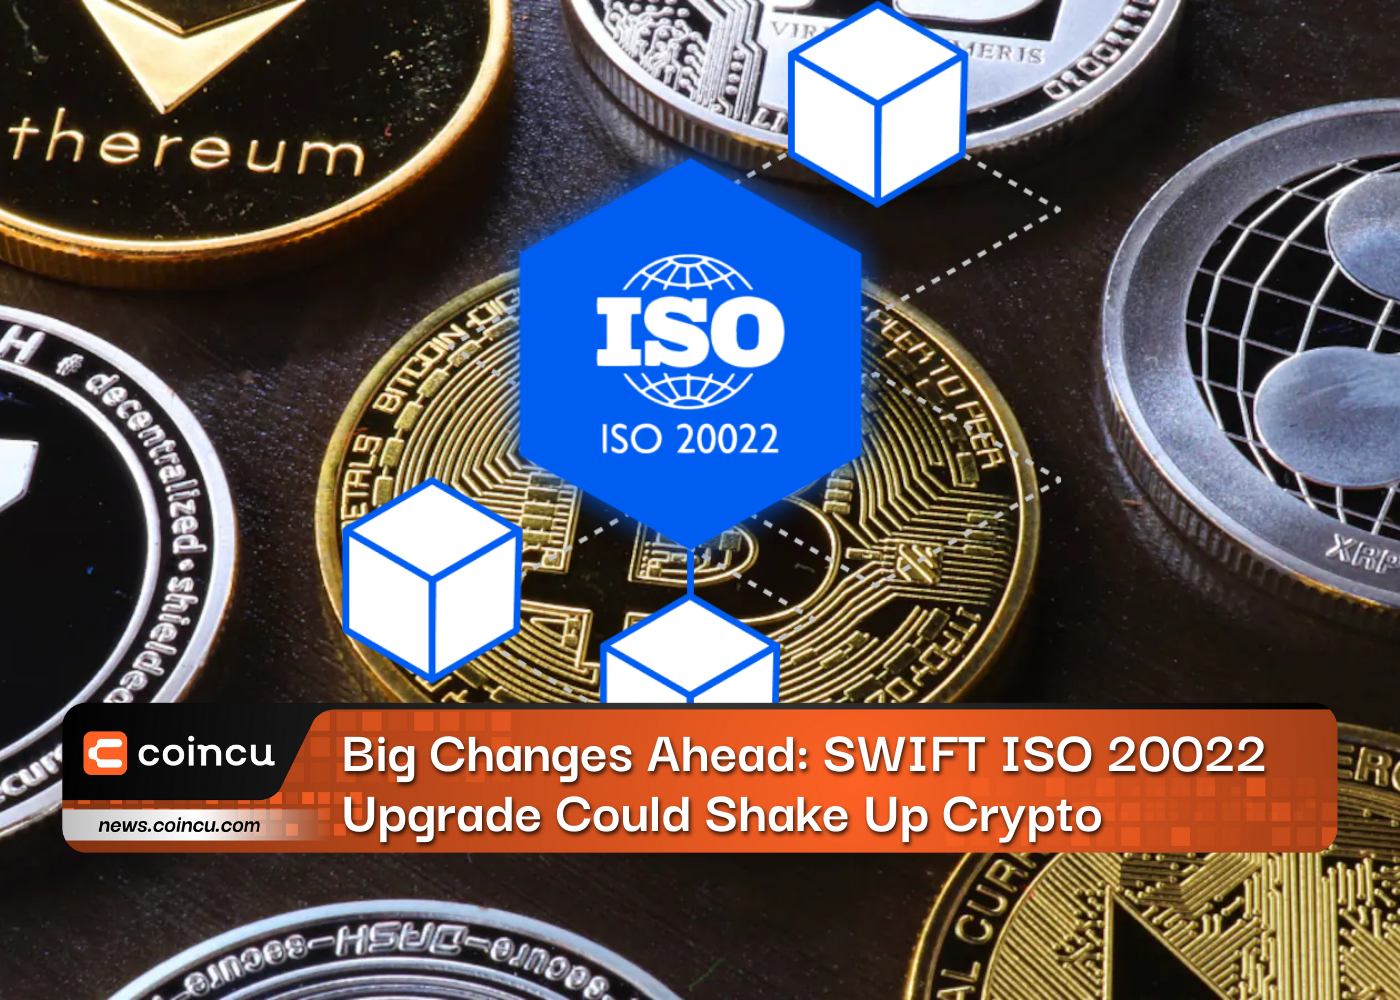 Big Changes Ahead: SWIFT ISO 20022 Upgrade Could Shake Up Crypto